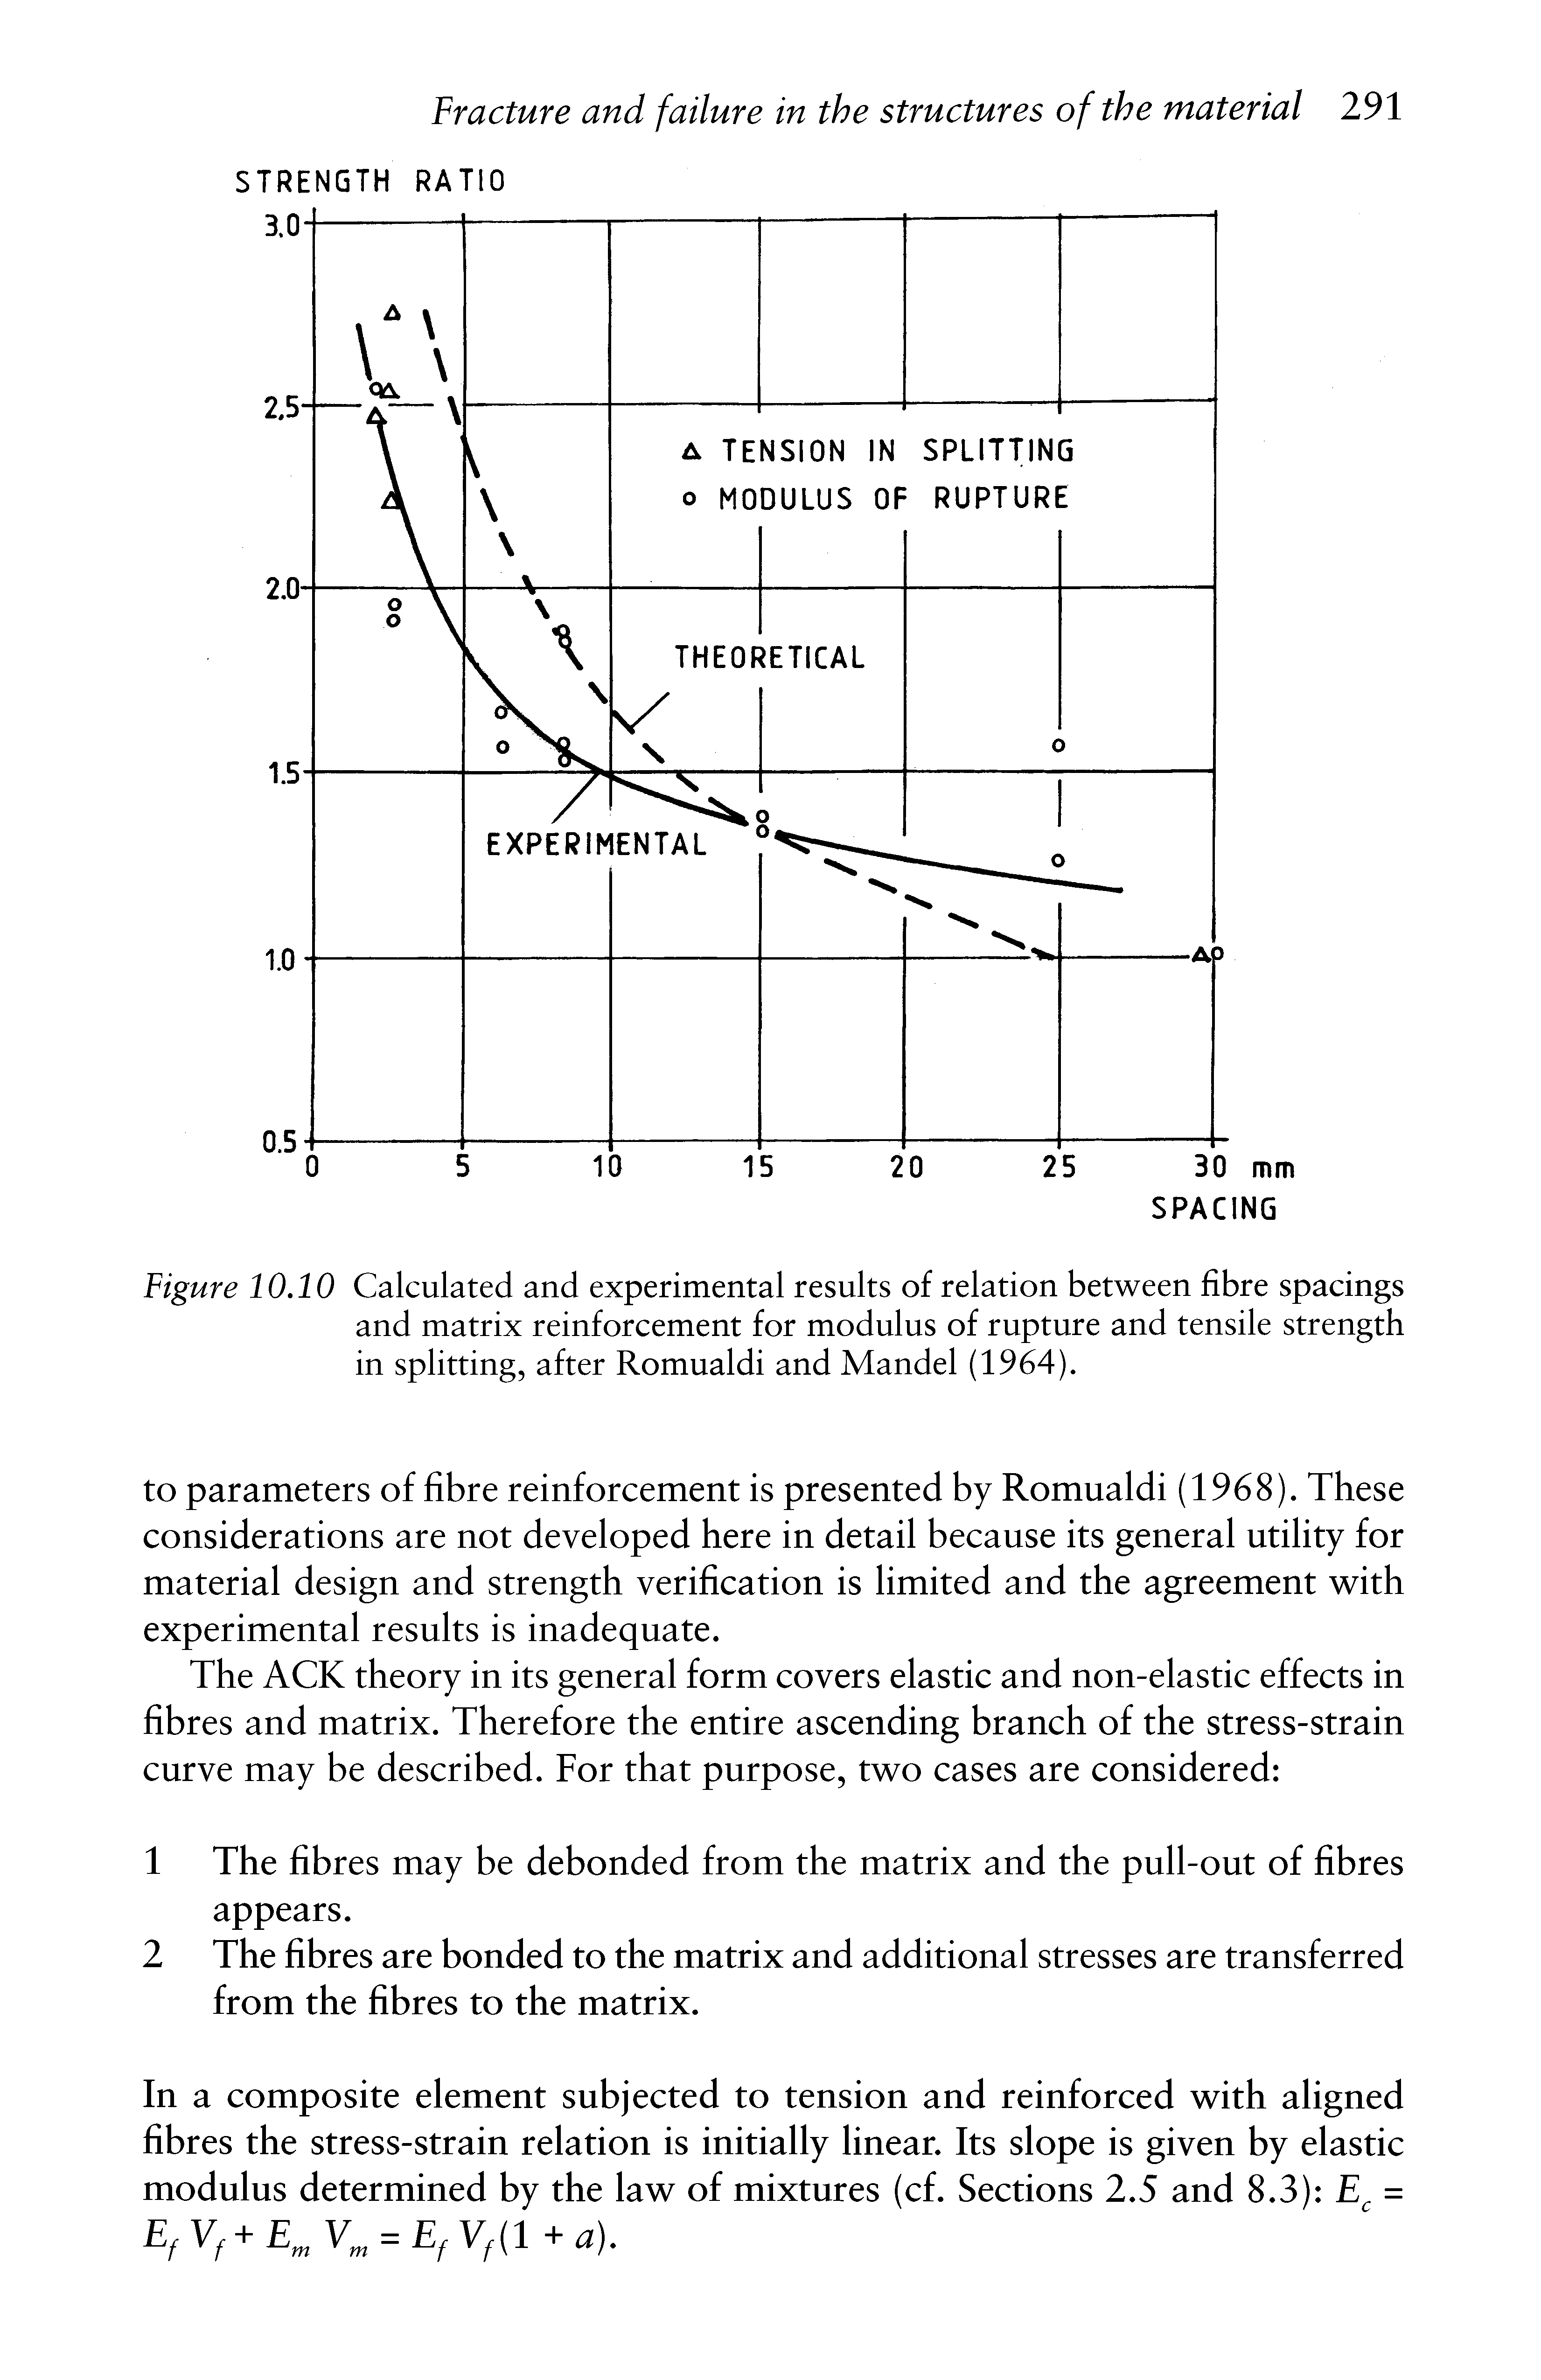 Figure 10.10 Calculated and experimental results of relation between fibre spacings and matrix reinforcement for modulus of rupture and tensile strength in splitting, after Romualdi and Mandel (1964).